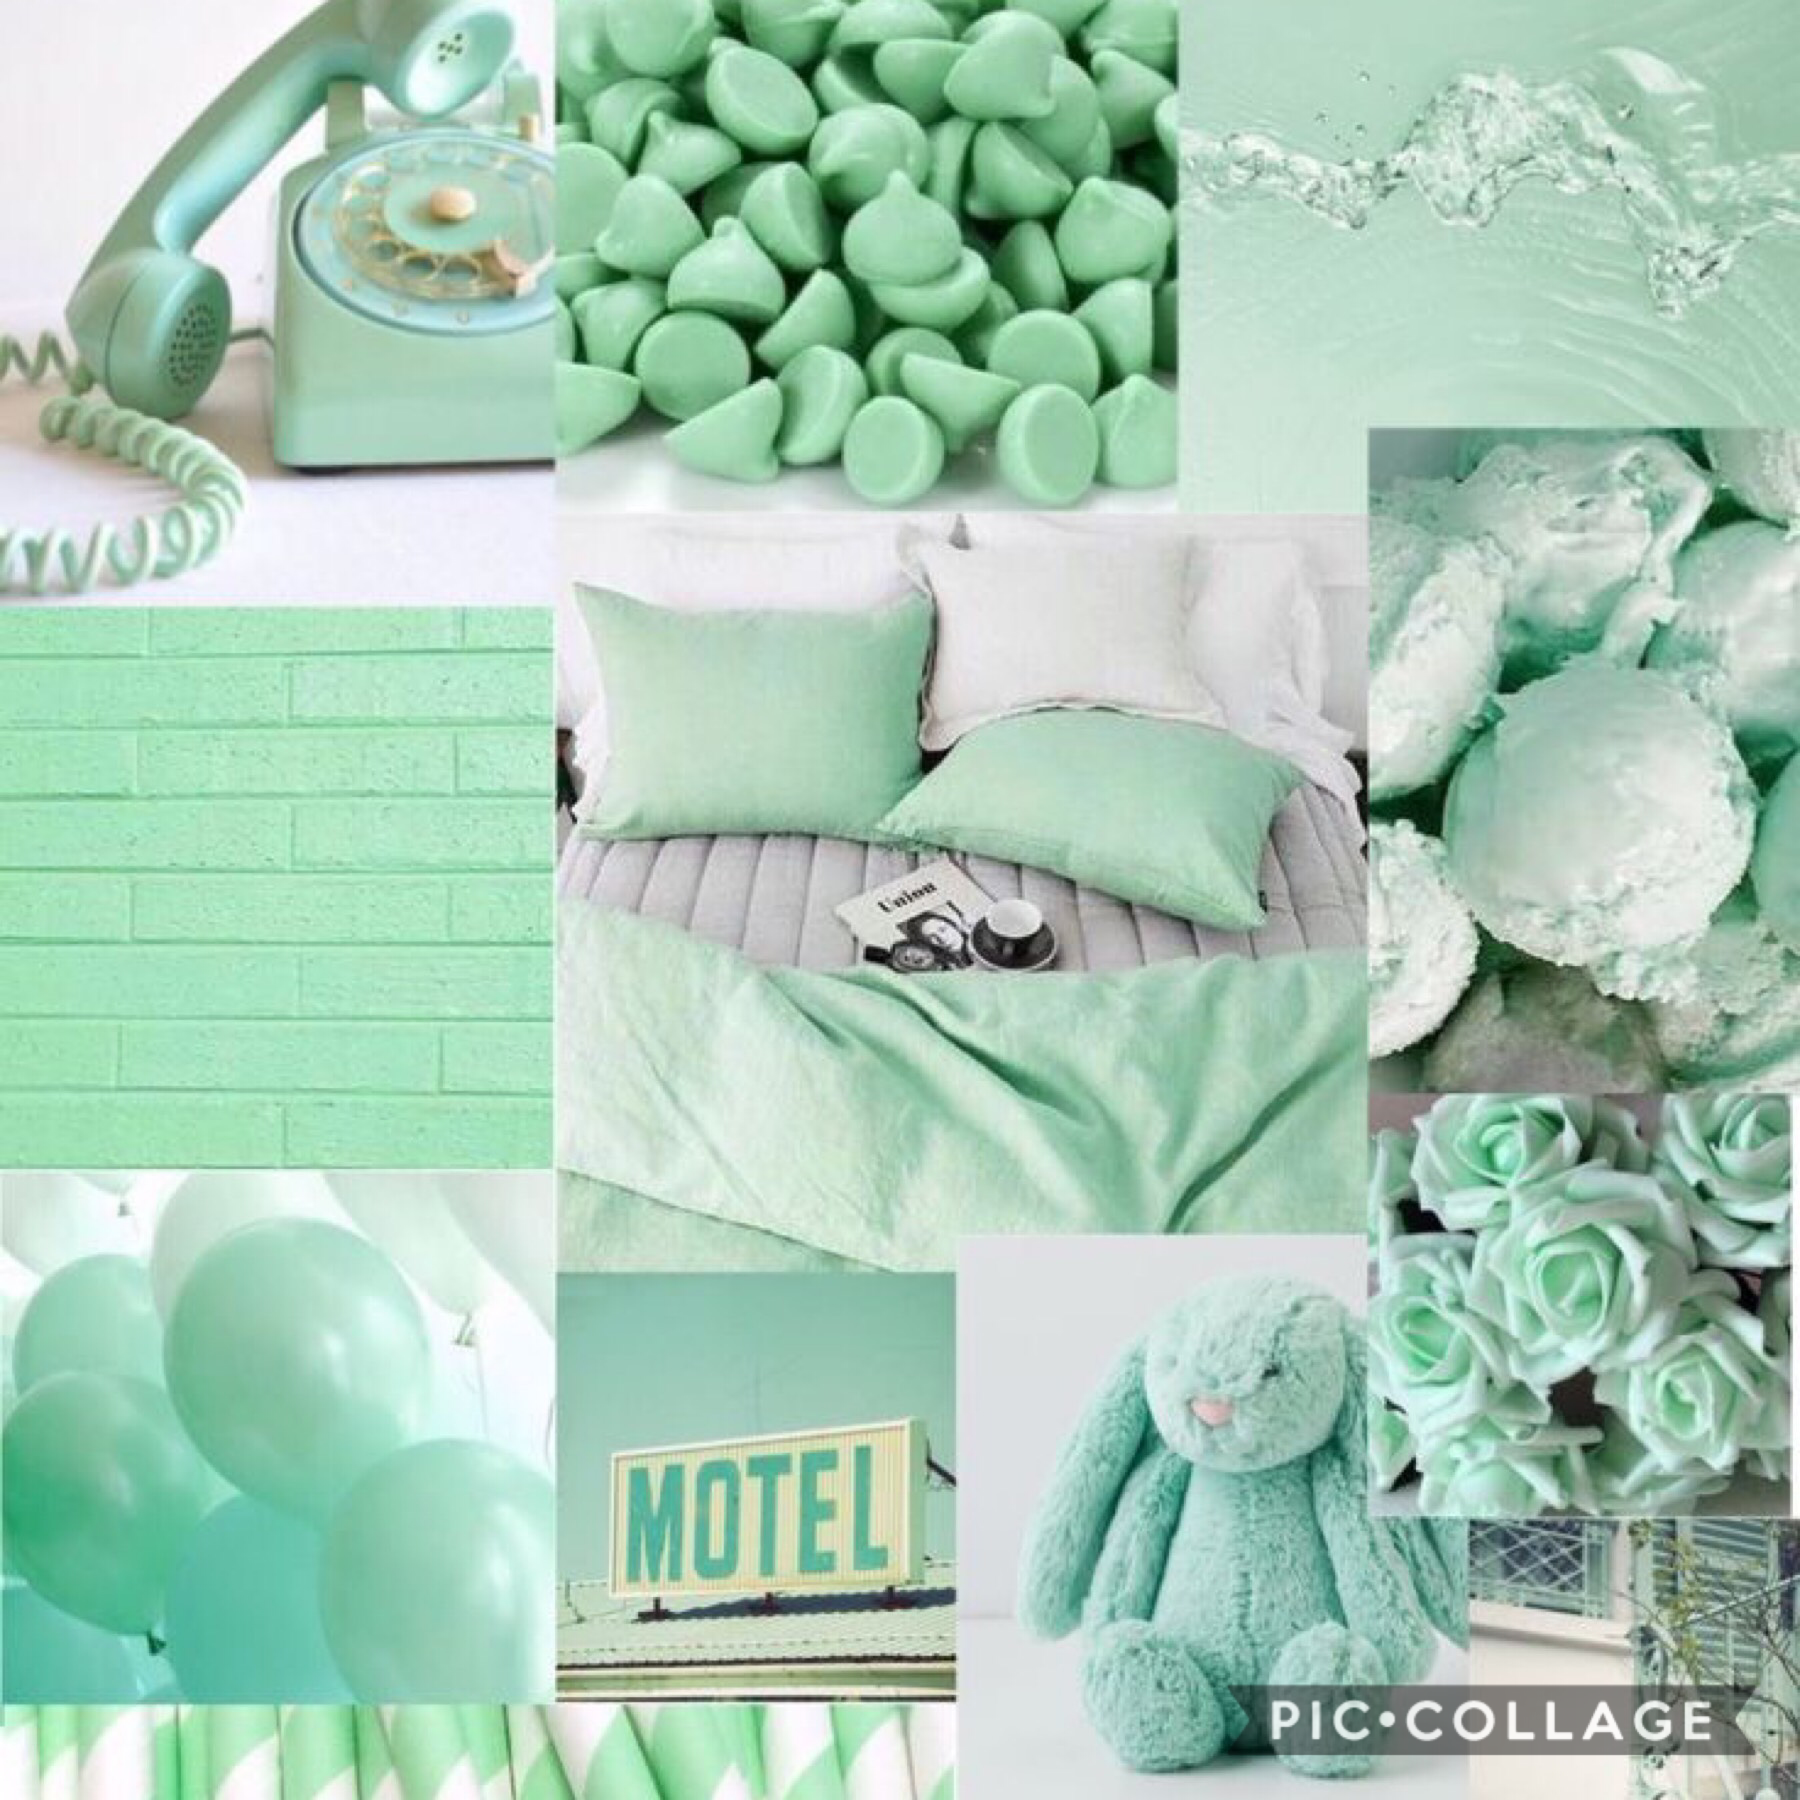 💚Tap💚

Color of the day is... GREEN!!